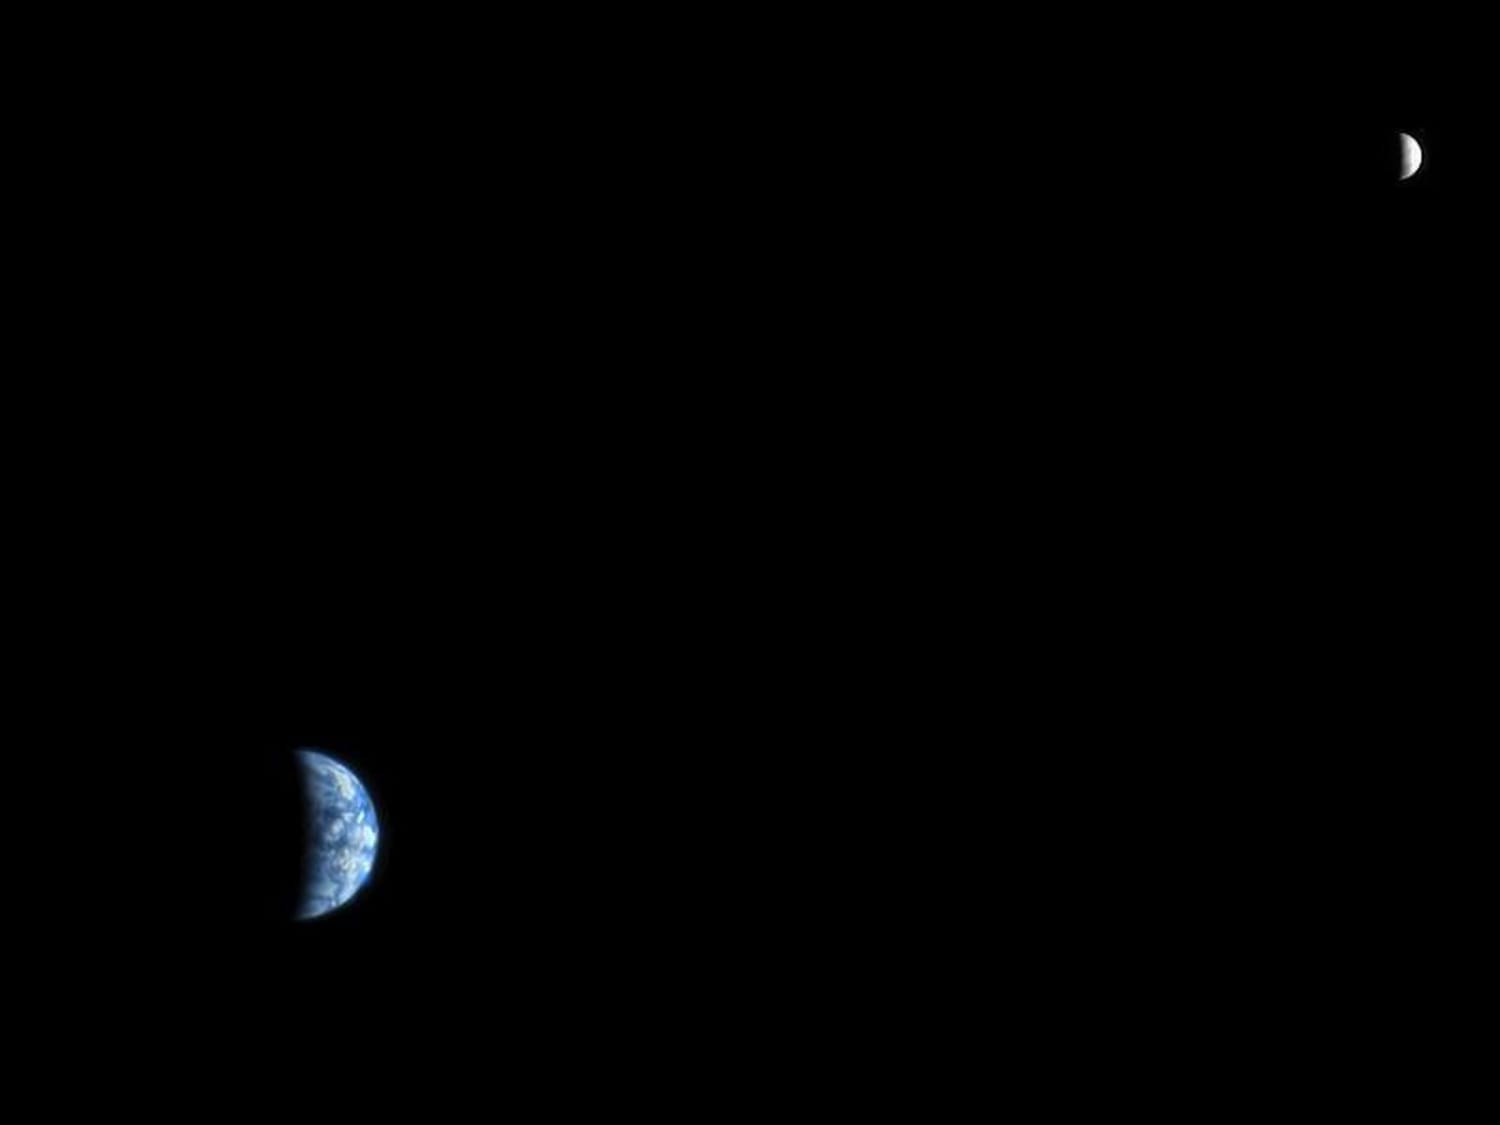 Earth and the Moon as seen by Mars Reconnaissance Orbiter's HiRISE